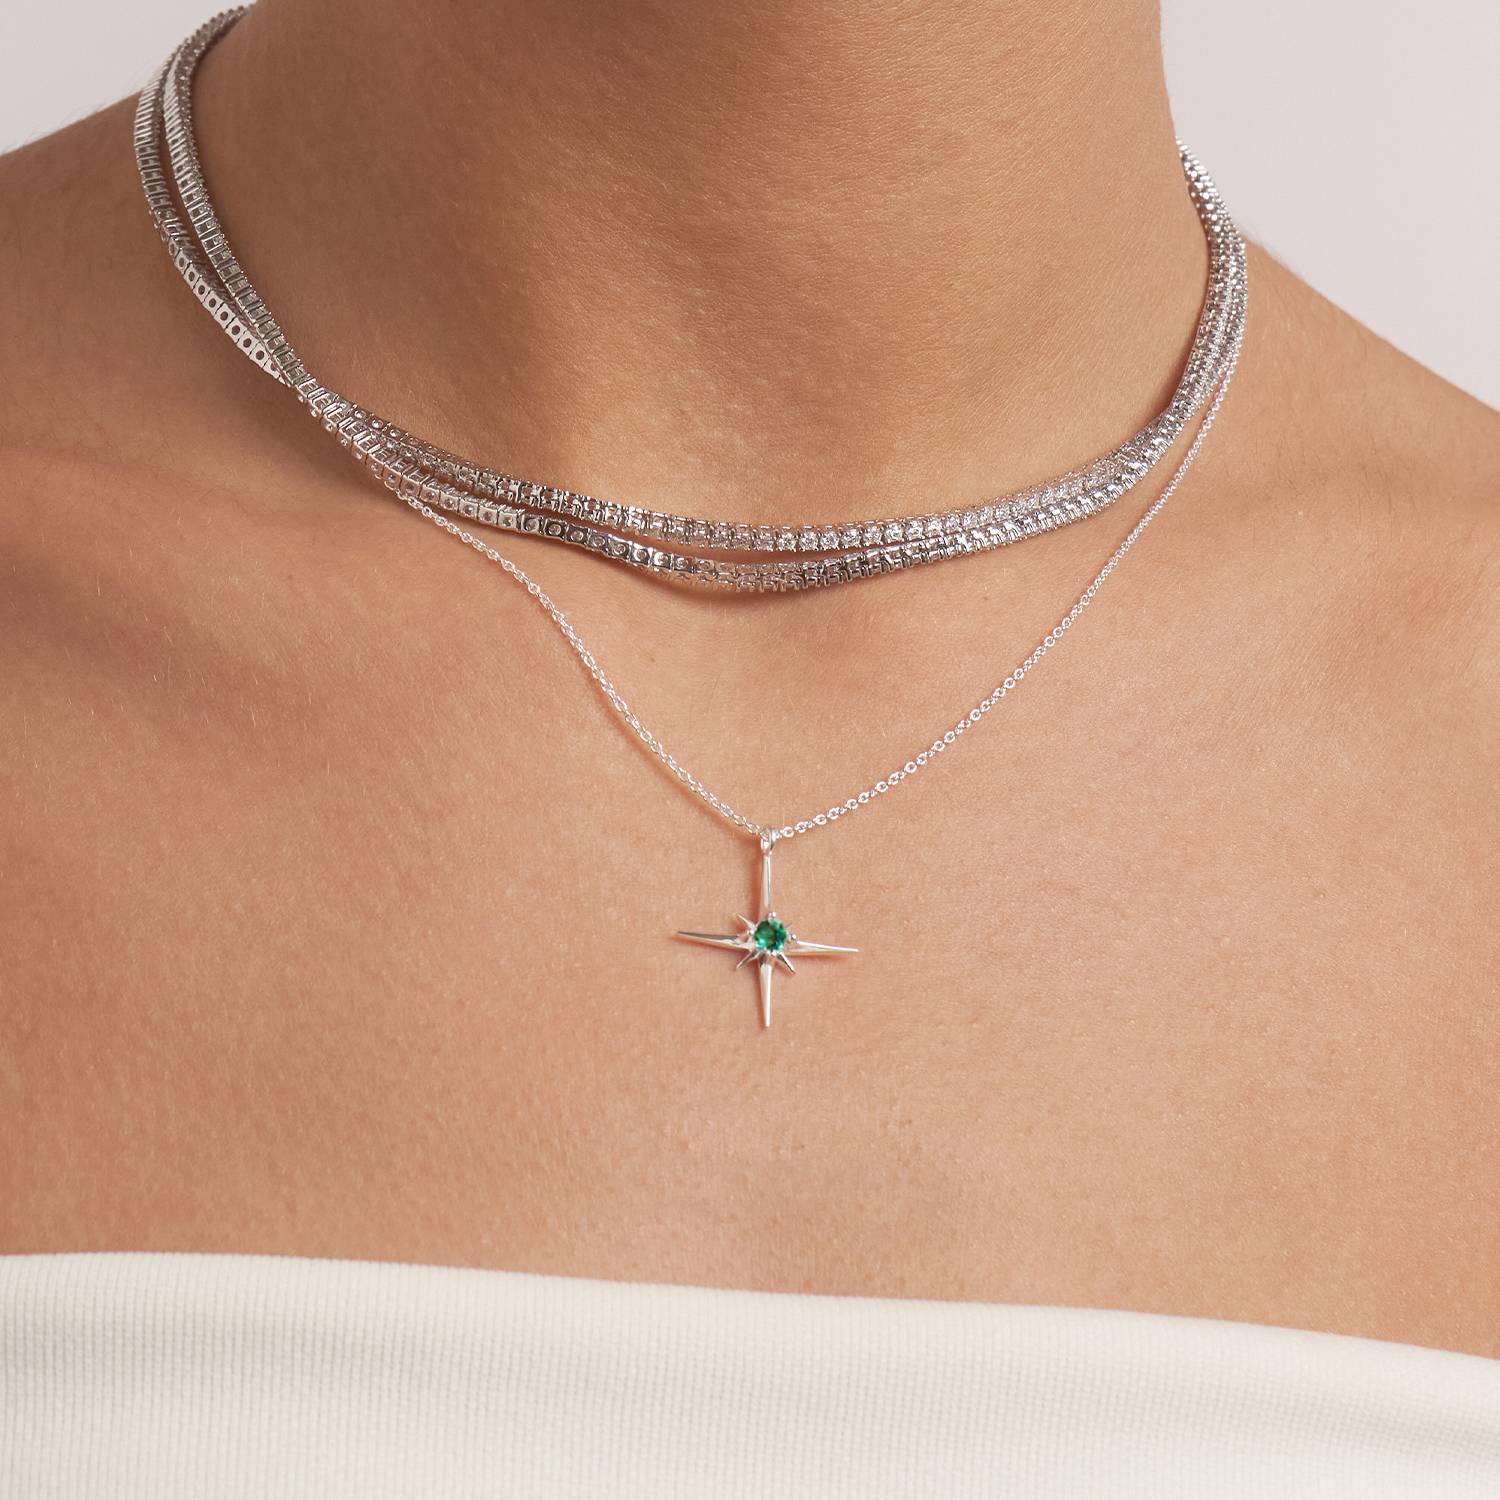 Engraved Northern Star Necklace with 0.3ct Green Emerald Gemstone - Silver-5 product photo